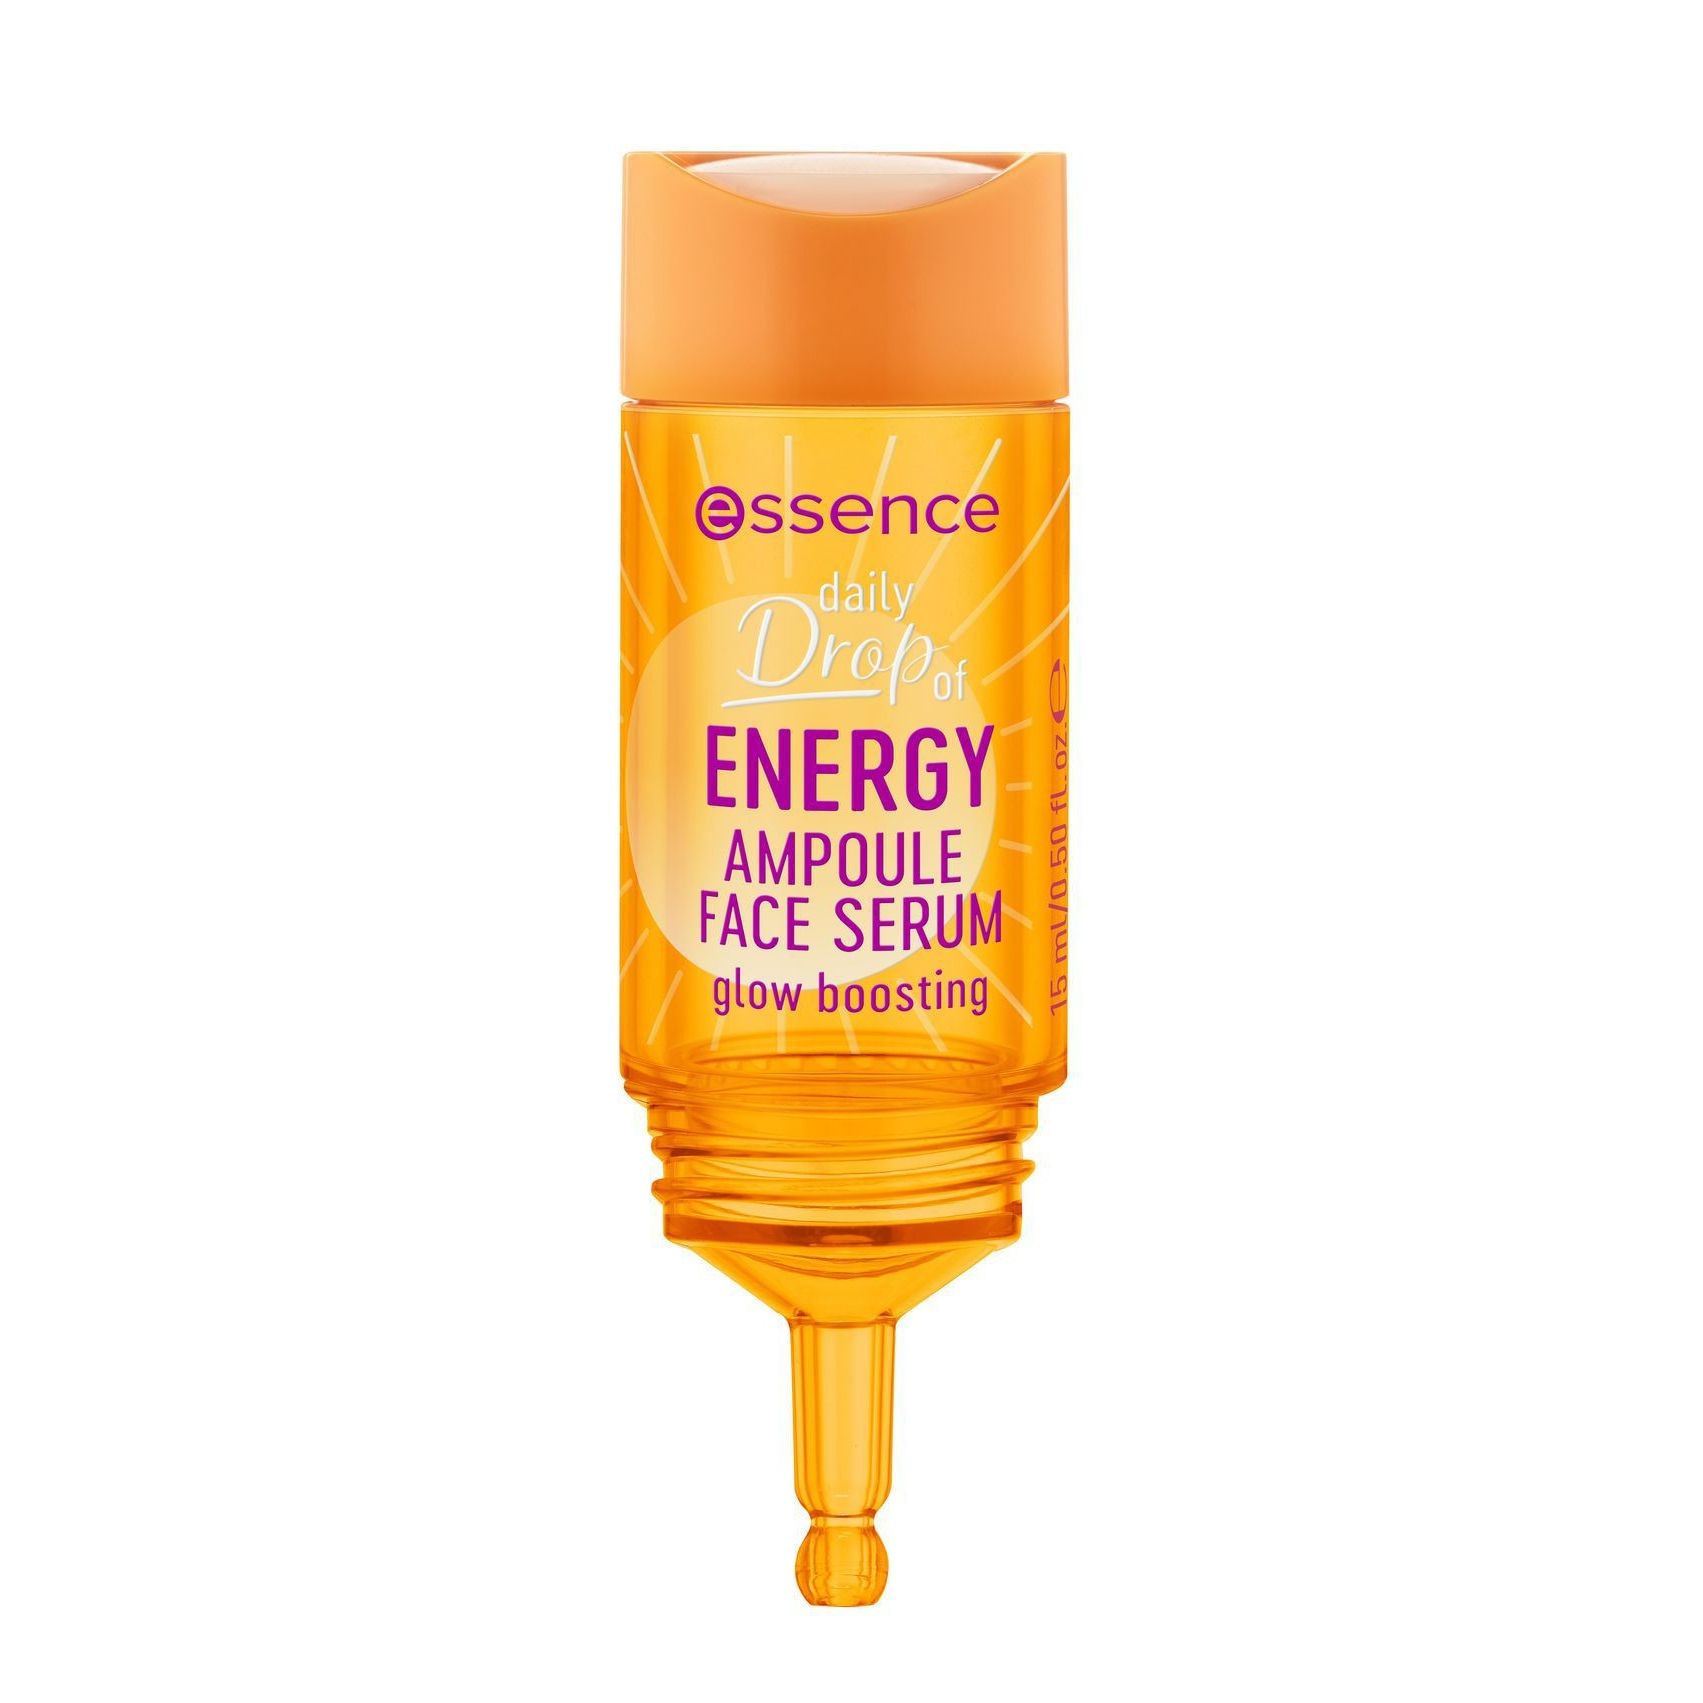 Gesichtsserum - Daily Drop Of Energy Ampoule Face Serum